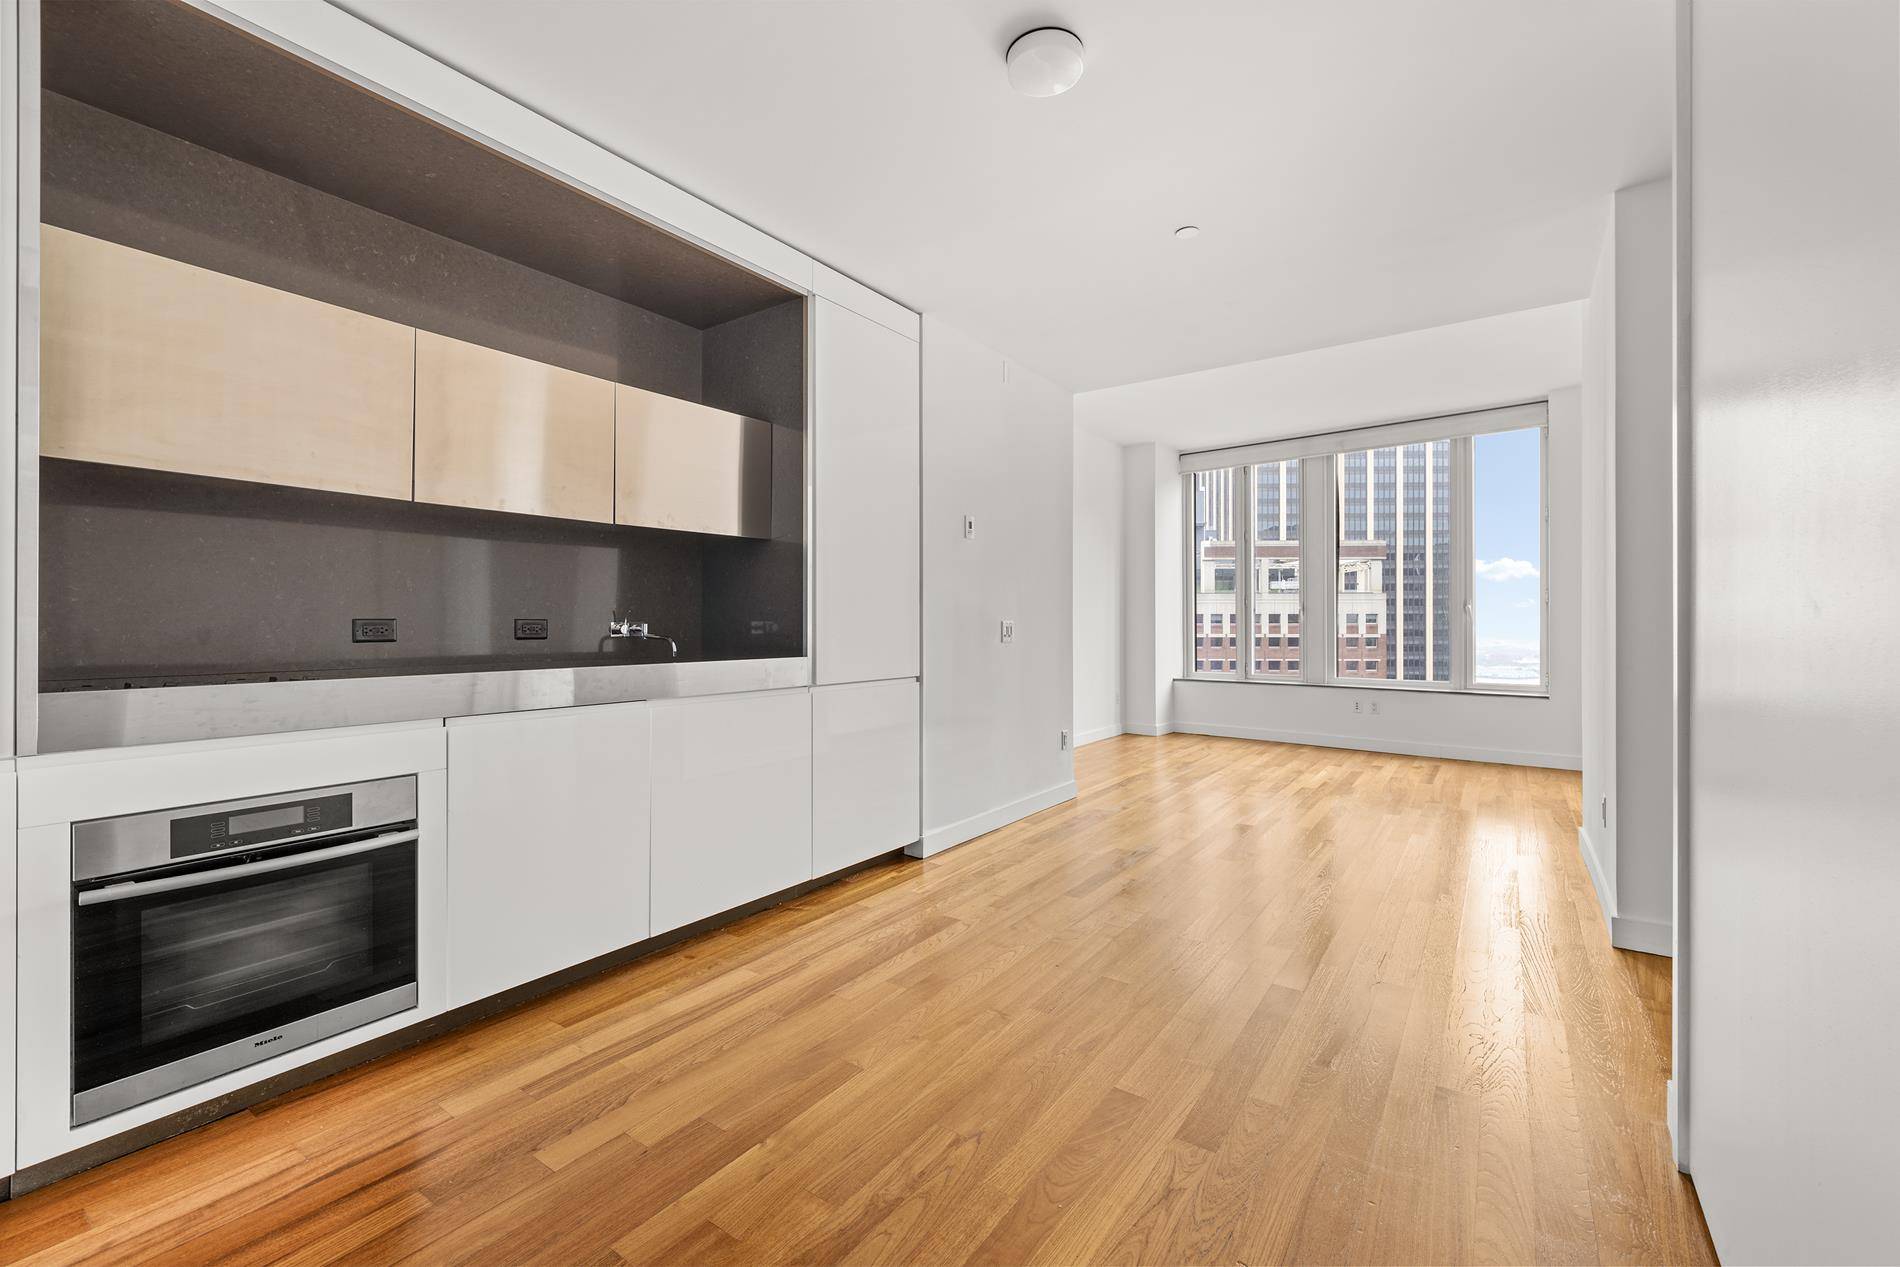 CUSTOM MADE WALKIN CLOSET STORAGE UNIT INCLUDED IN SALE PRICE Discover the epitome of urban living in this oversized one bedroom, perfectly situated on the 21st floor of the iconic ...